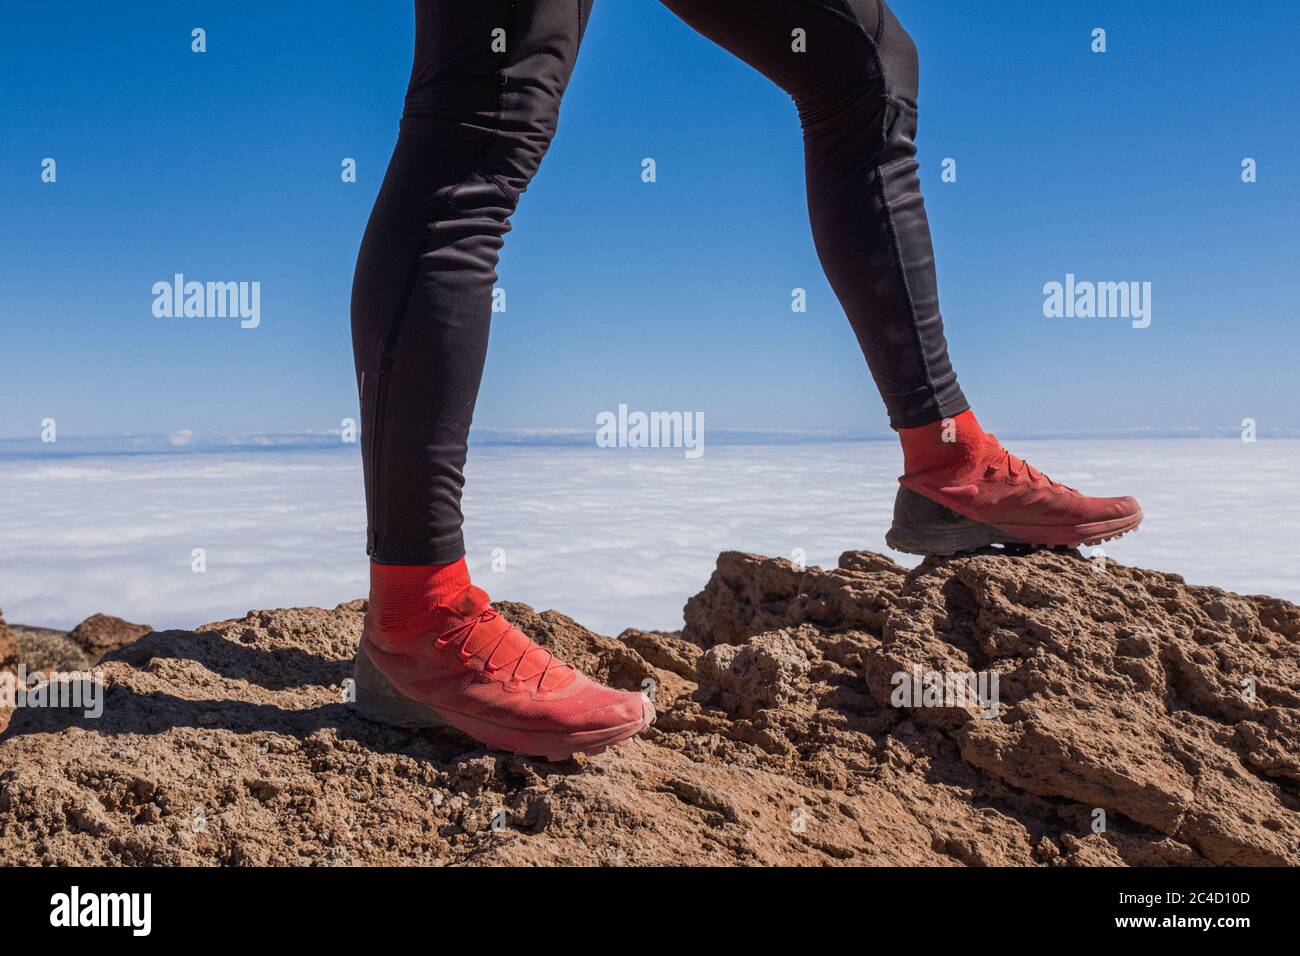 Successful runner hiker enjoy the view on mountain top cliff edge Stock Photo